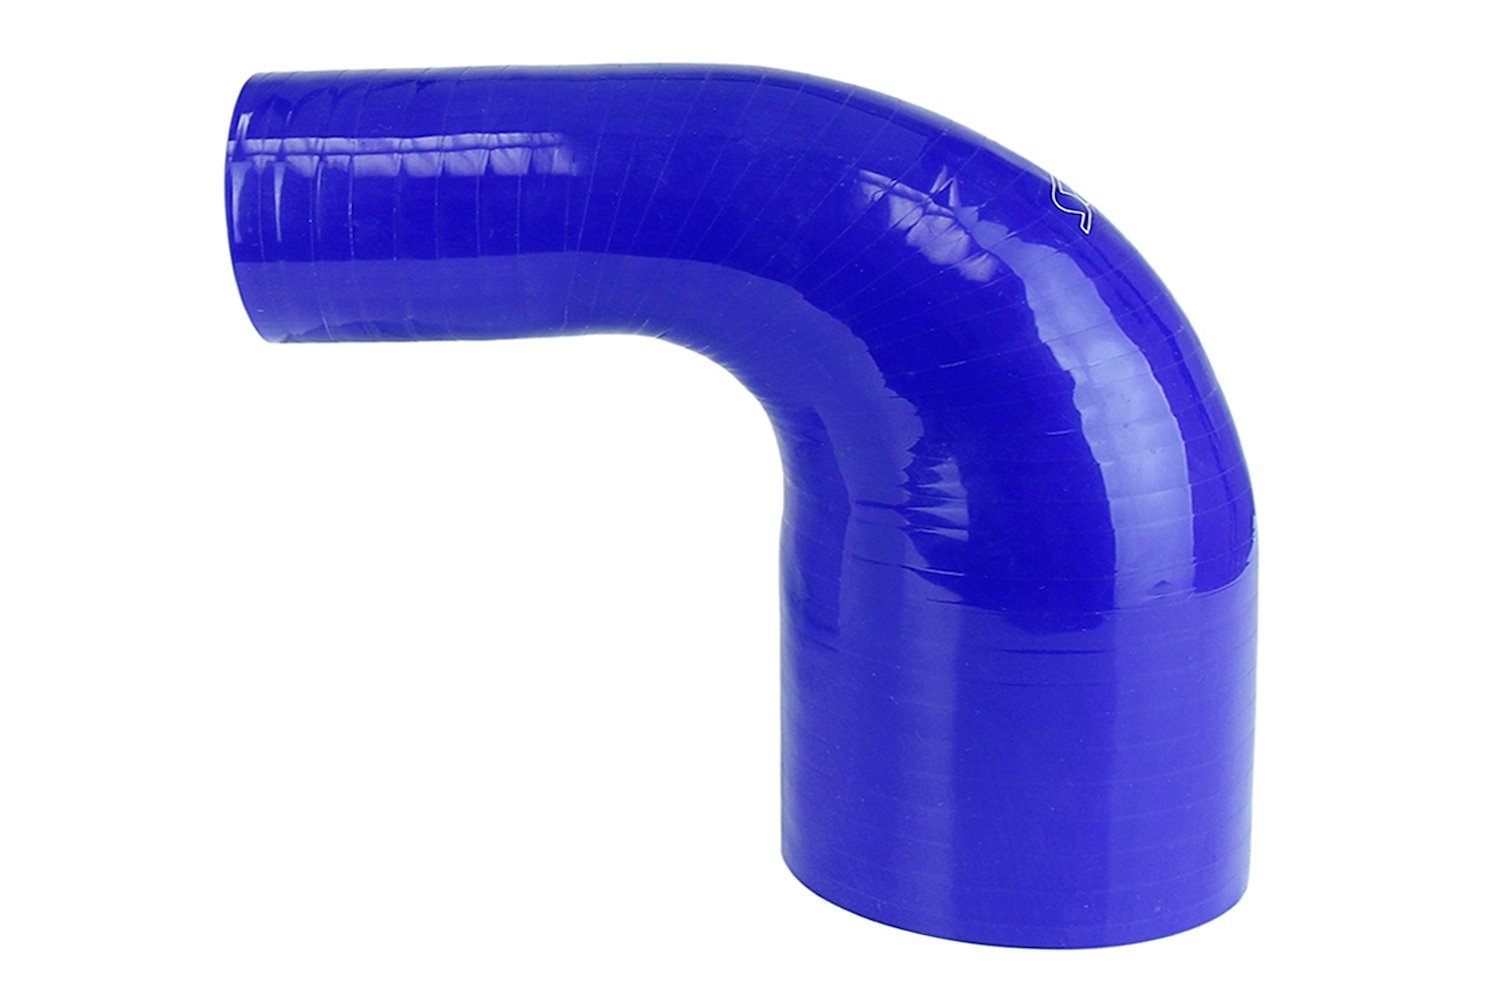 HTSER90-250-350-BLUE Silicone 90-Degree Elbow Hose, High-Temp 4-Ply Reinforced, 2-1/2 in. - 3-1/2 in. ID, Blue